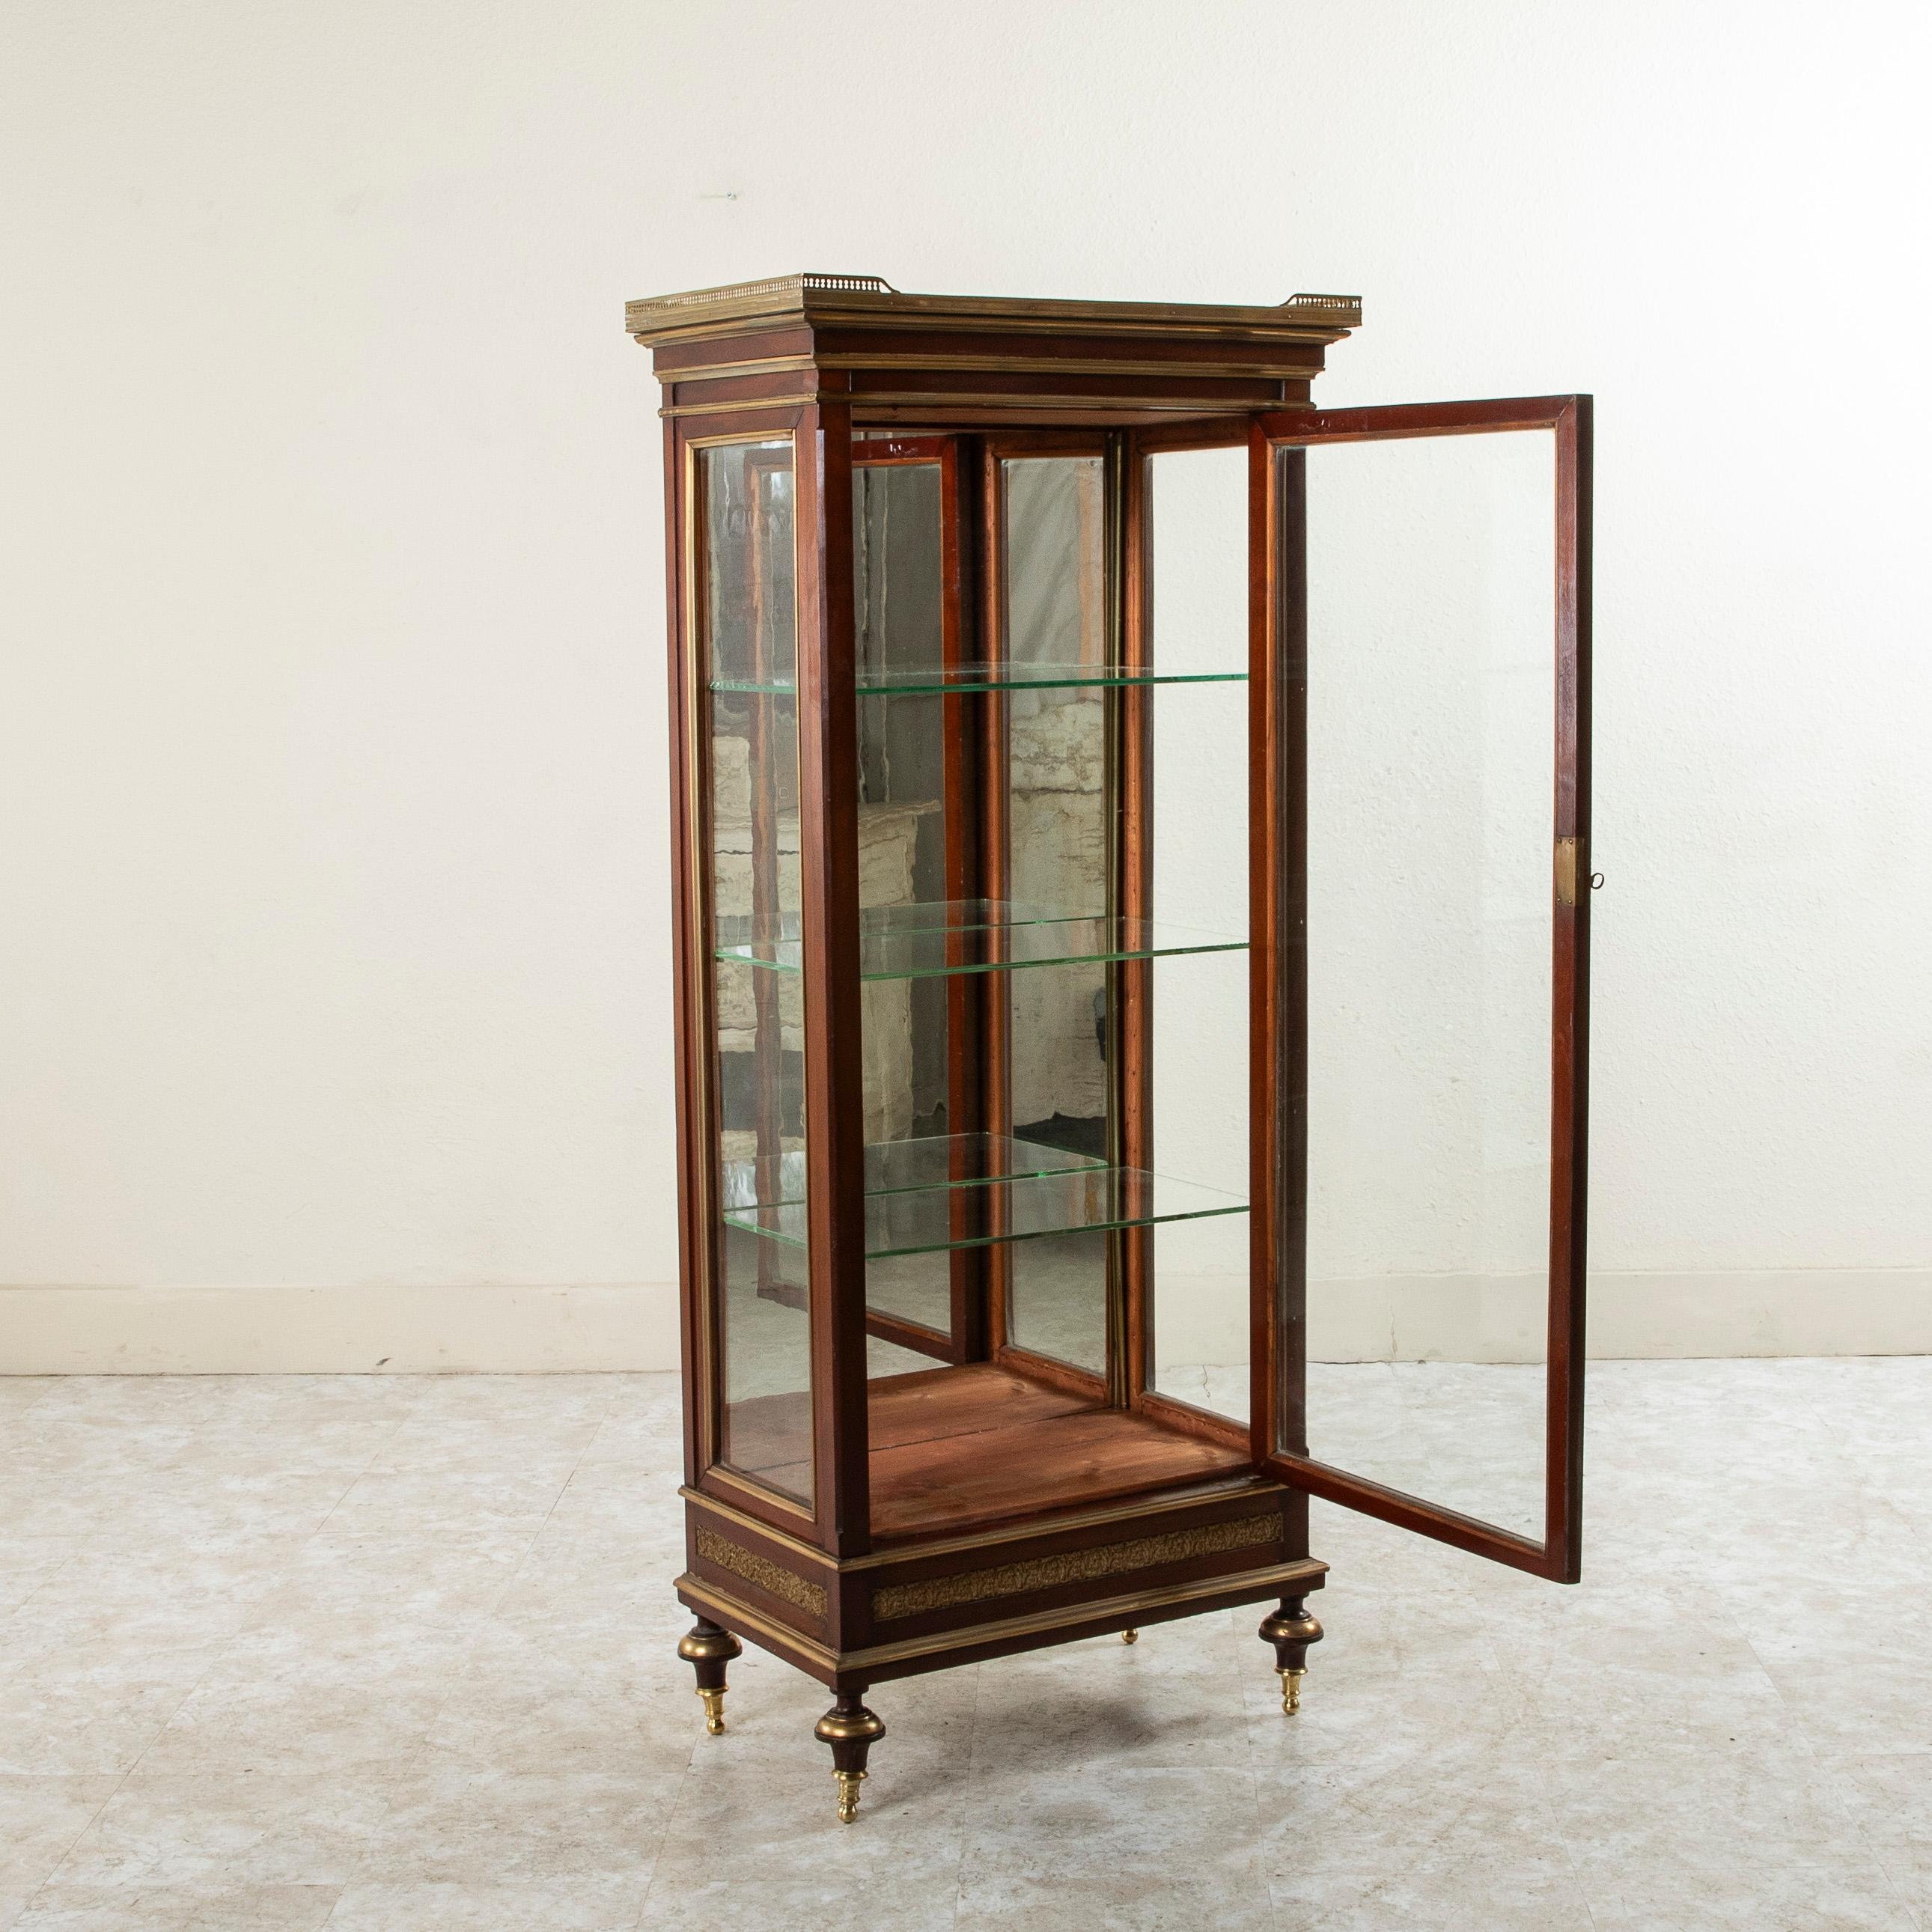 Small Scale Mid-19th Century French Louis XVI Style Mahogany Vitrine, Bookcase For Sale 2